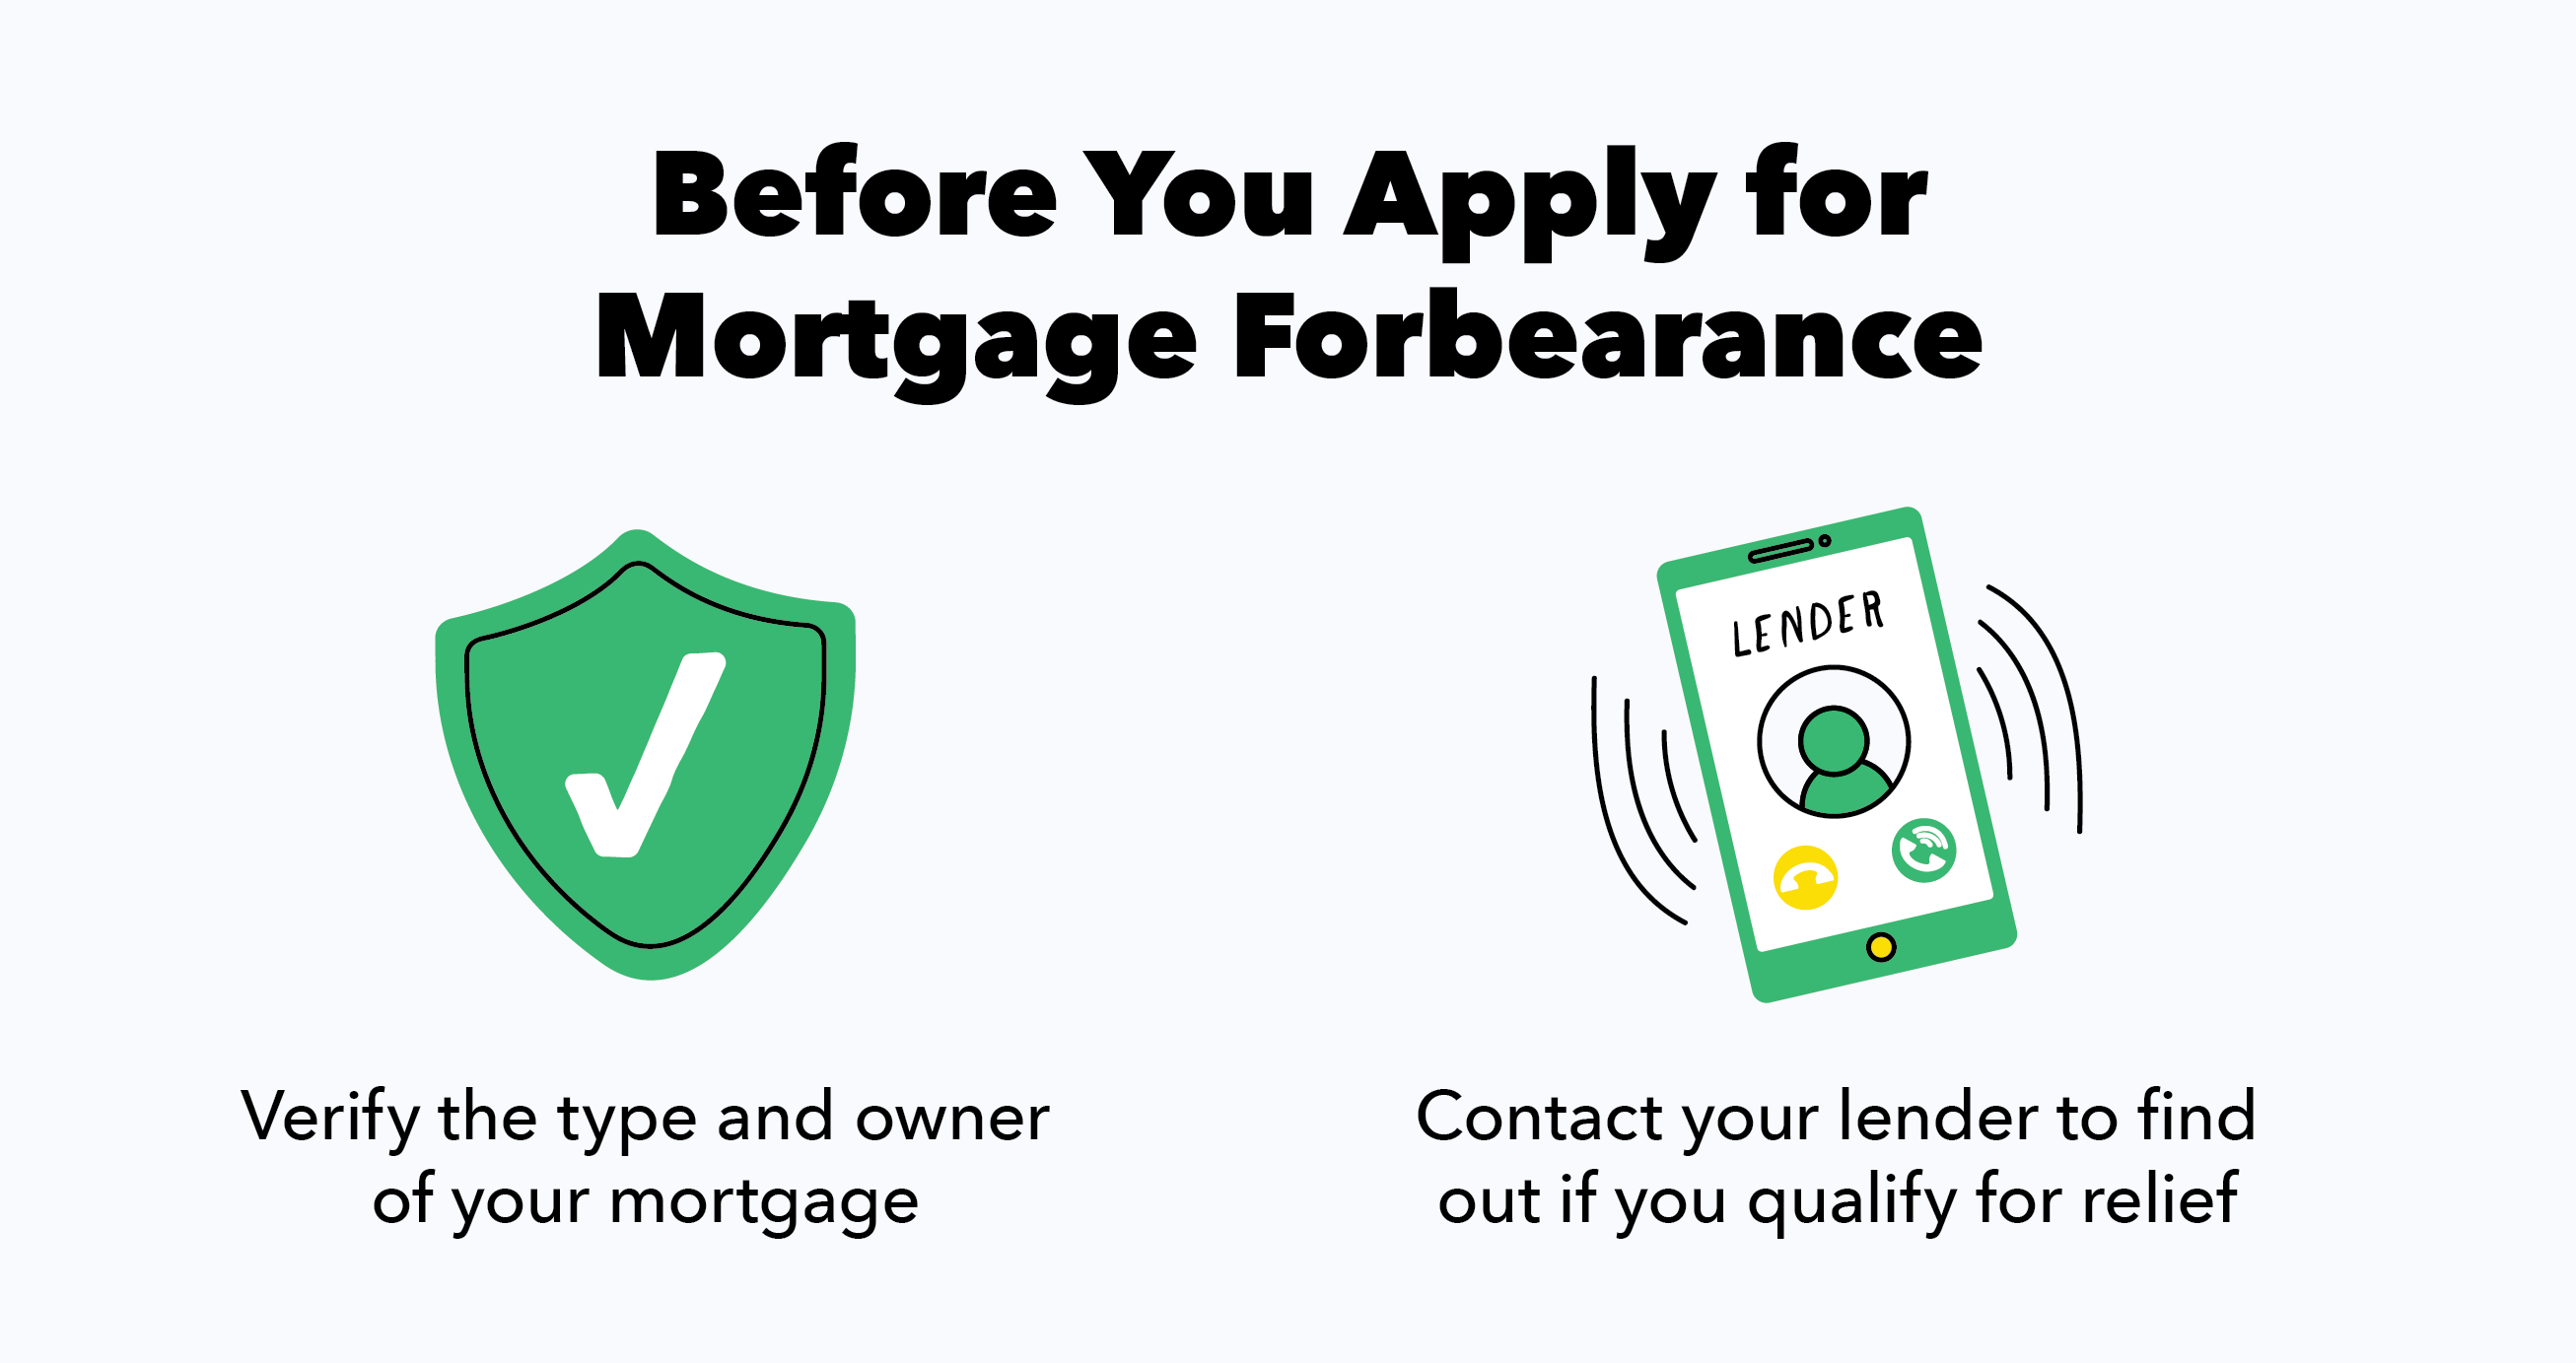 Review your mortgage and contact your lender before applying